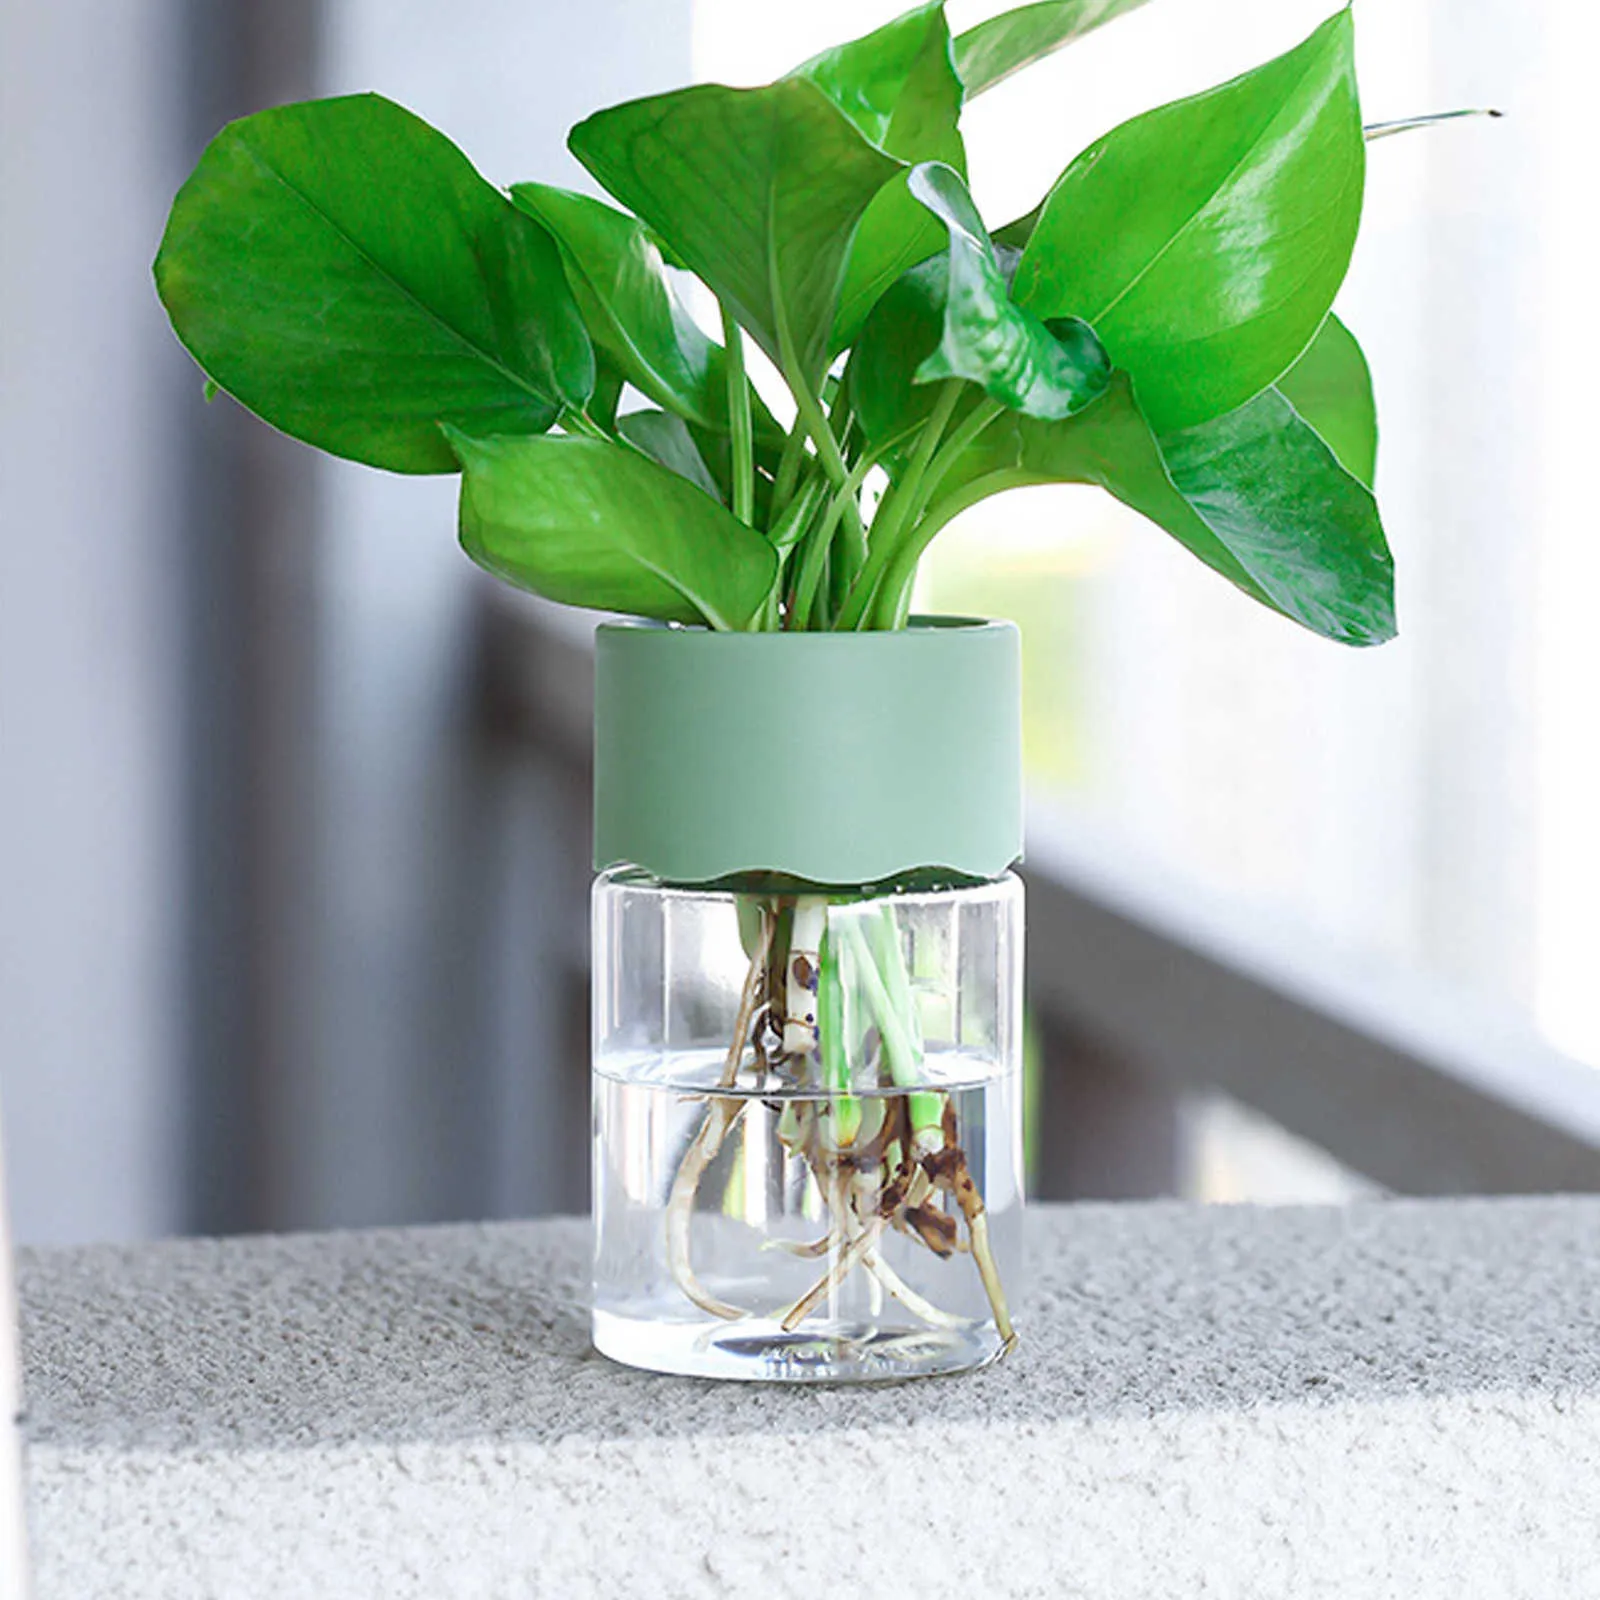 Transparent Round Hydroponic Water Pot For Plants For Water Planting, Bonsai,  And Home Decoration Plastic Tabletop Container For Plants And Living Room  J230302 From Us_oregon, $1.01